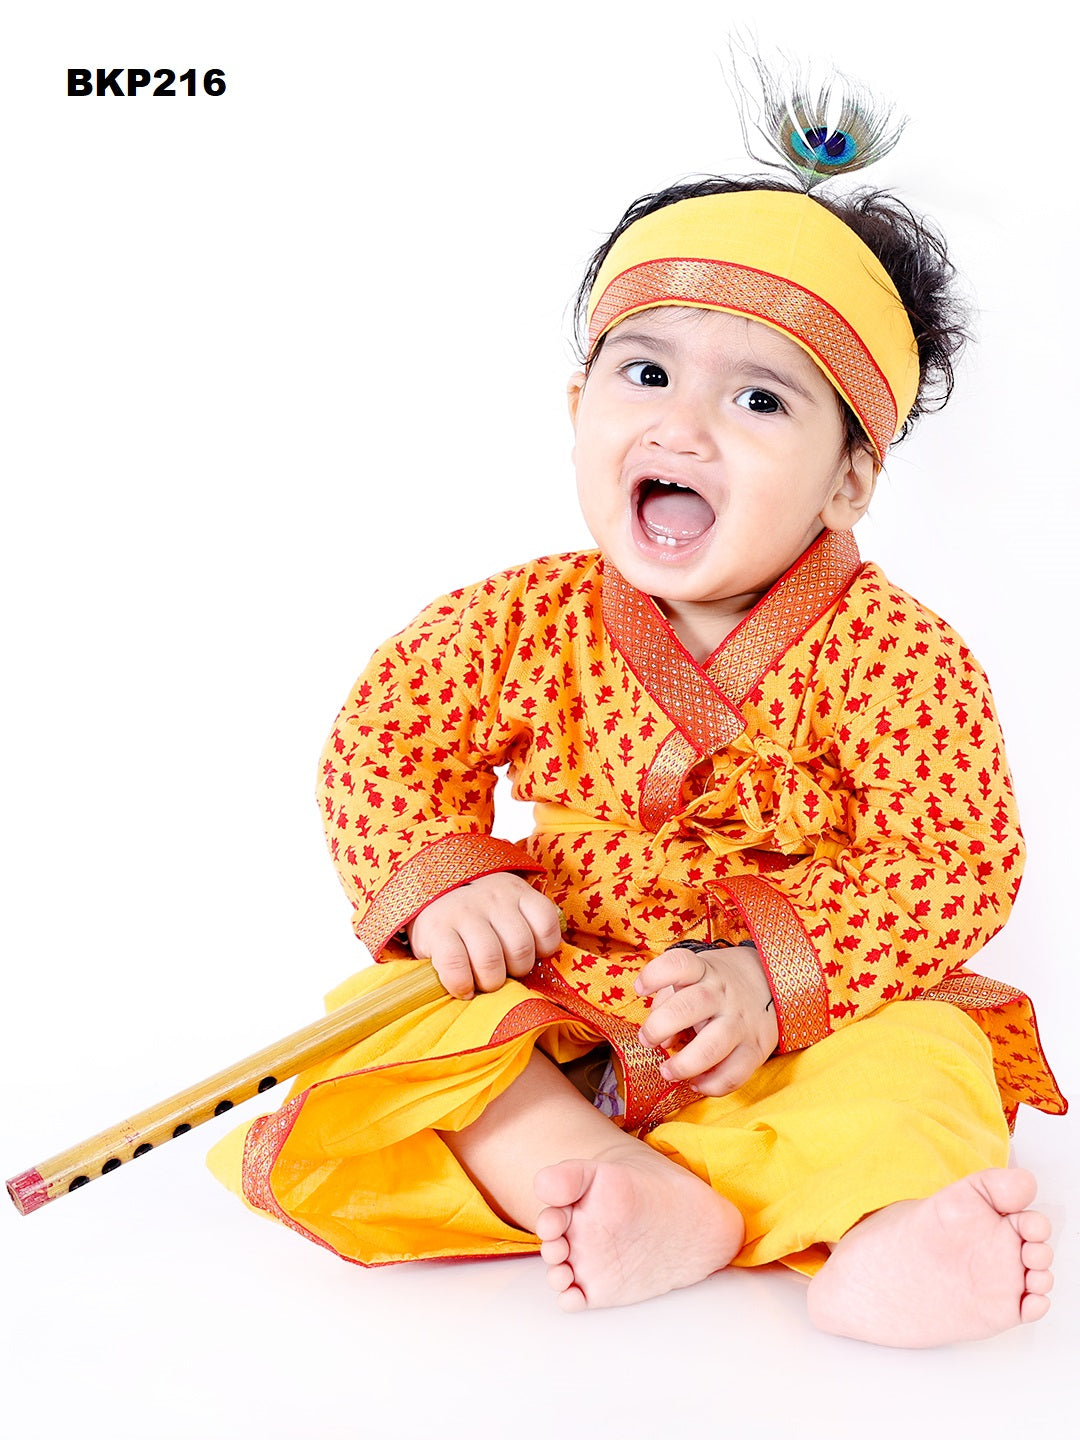 BKP216 - Yellow block printed cotton krishna costume set with accessories